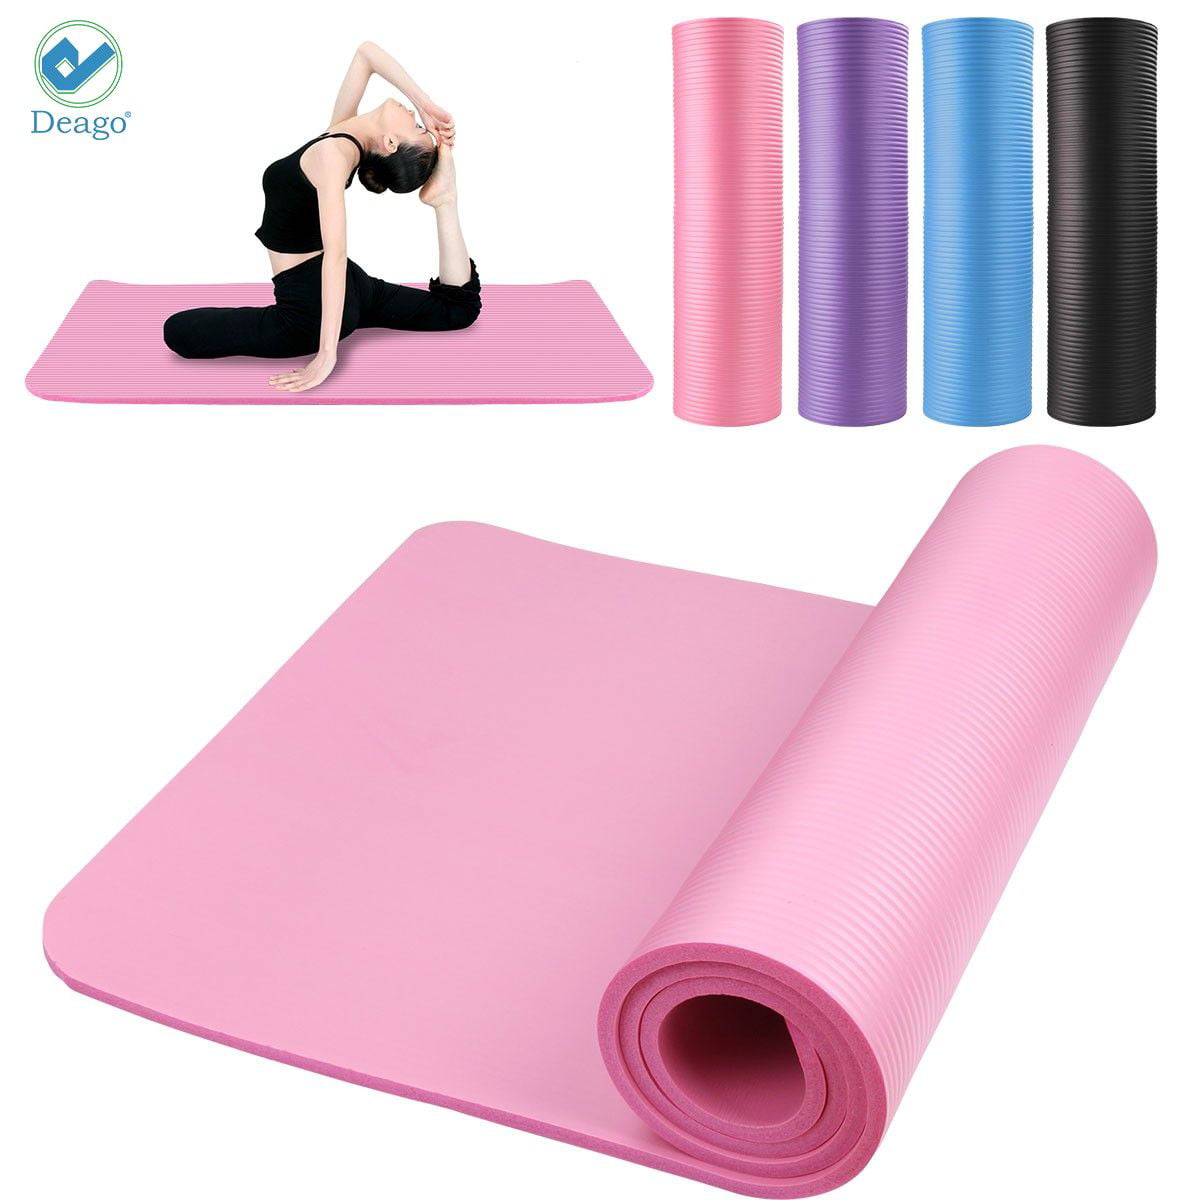 Durable 72x24x0.6" 15mm Thick Yoga Mat Nonslip Pad Exercise Fitness Pilates 